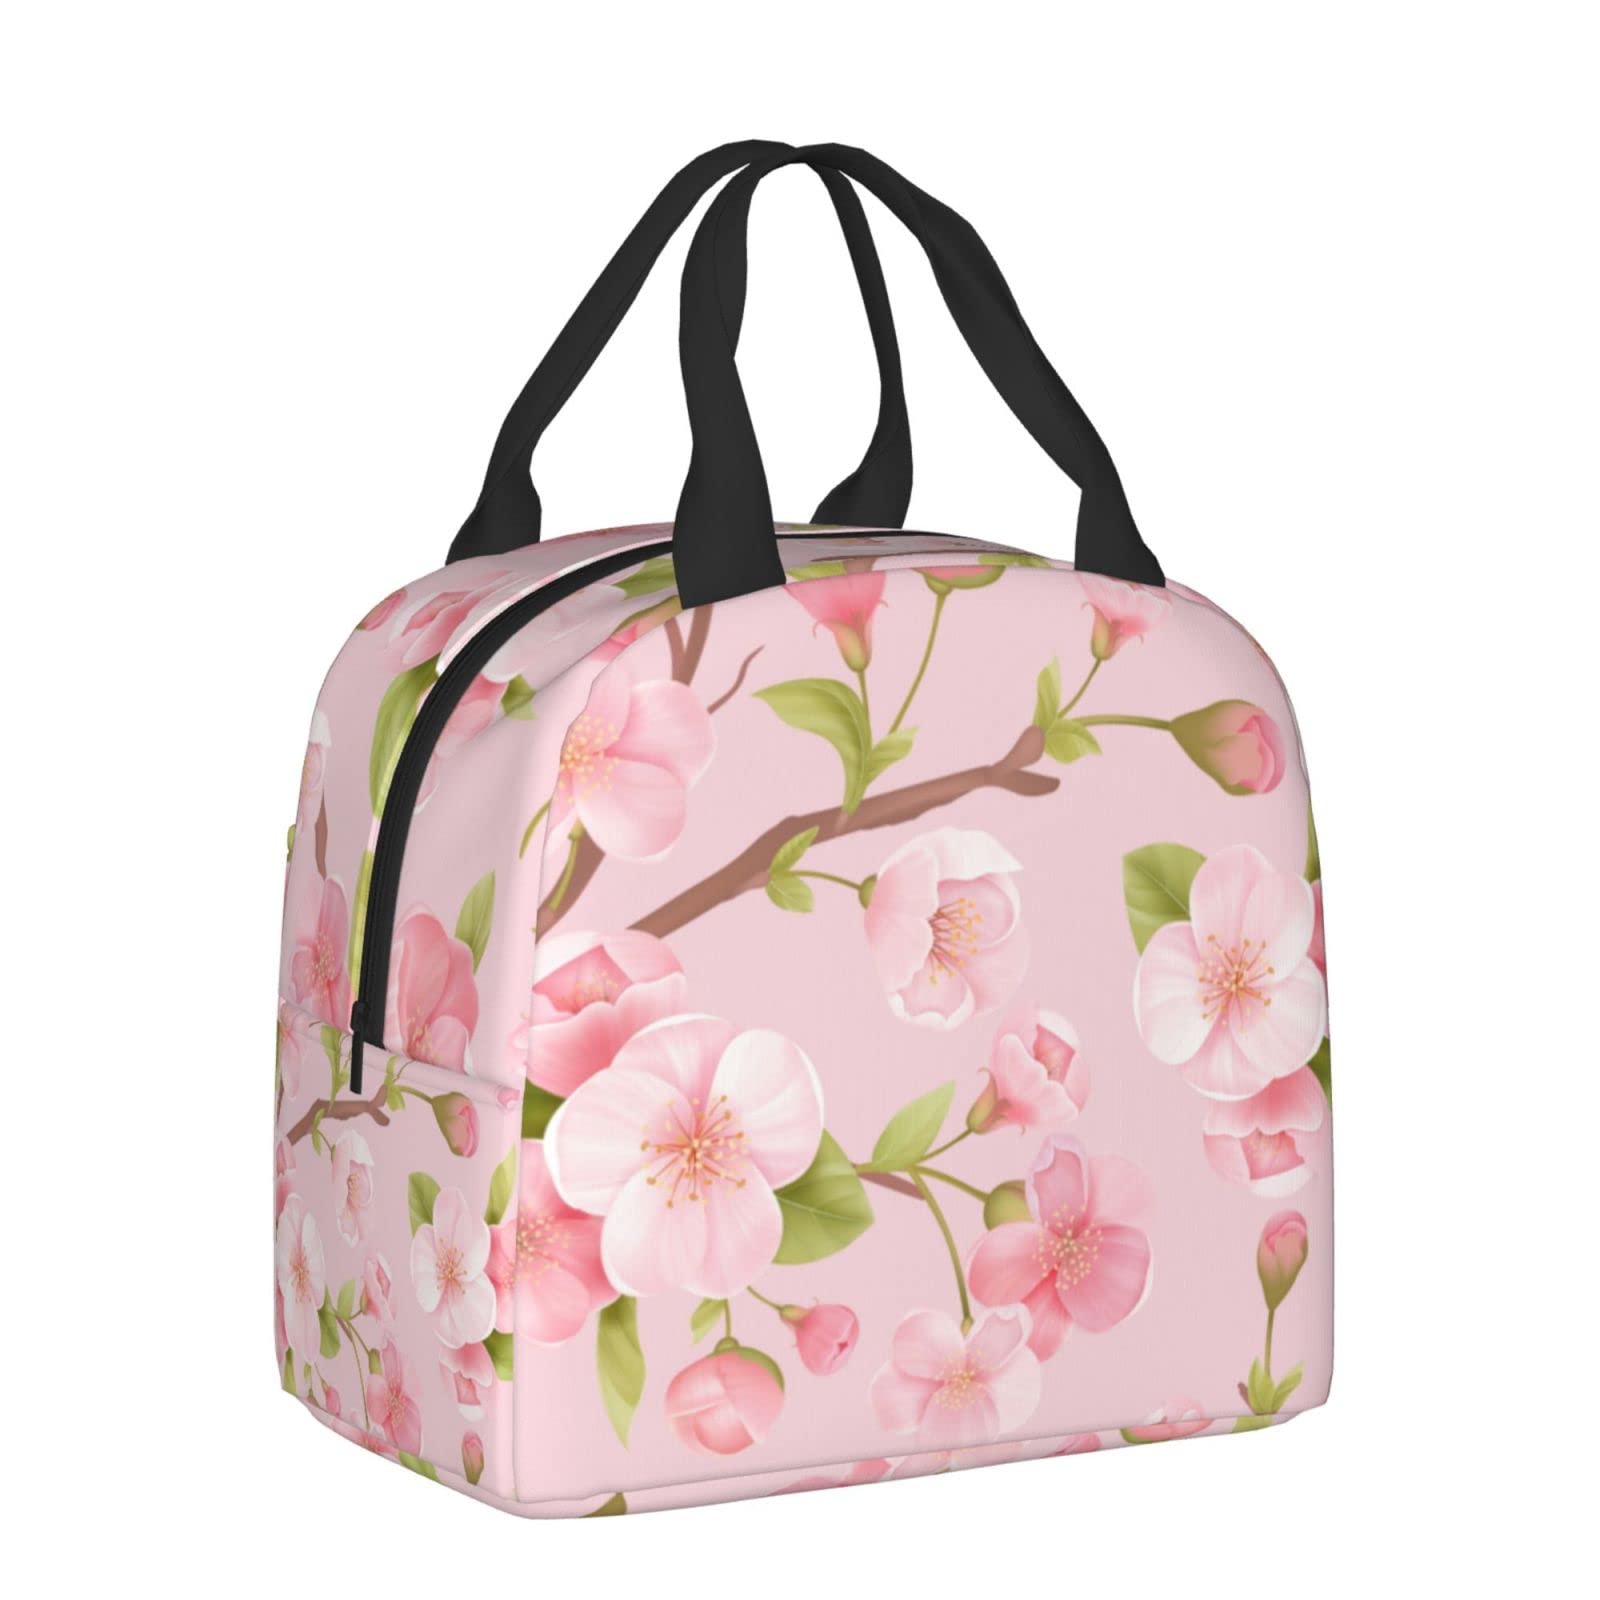 AuHomea Pink Sakura Blossom Lunch Bag For Women Men Insulated Lunch Box For Adult Reusable Lunch Bags With Pocket Zippers For Work, Picnic, School Or Travel